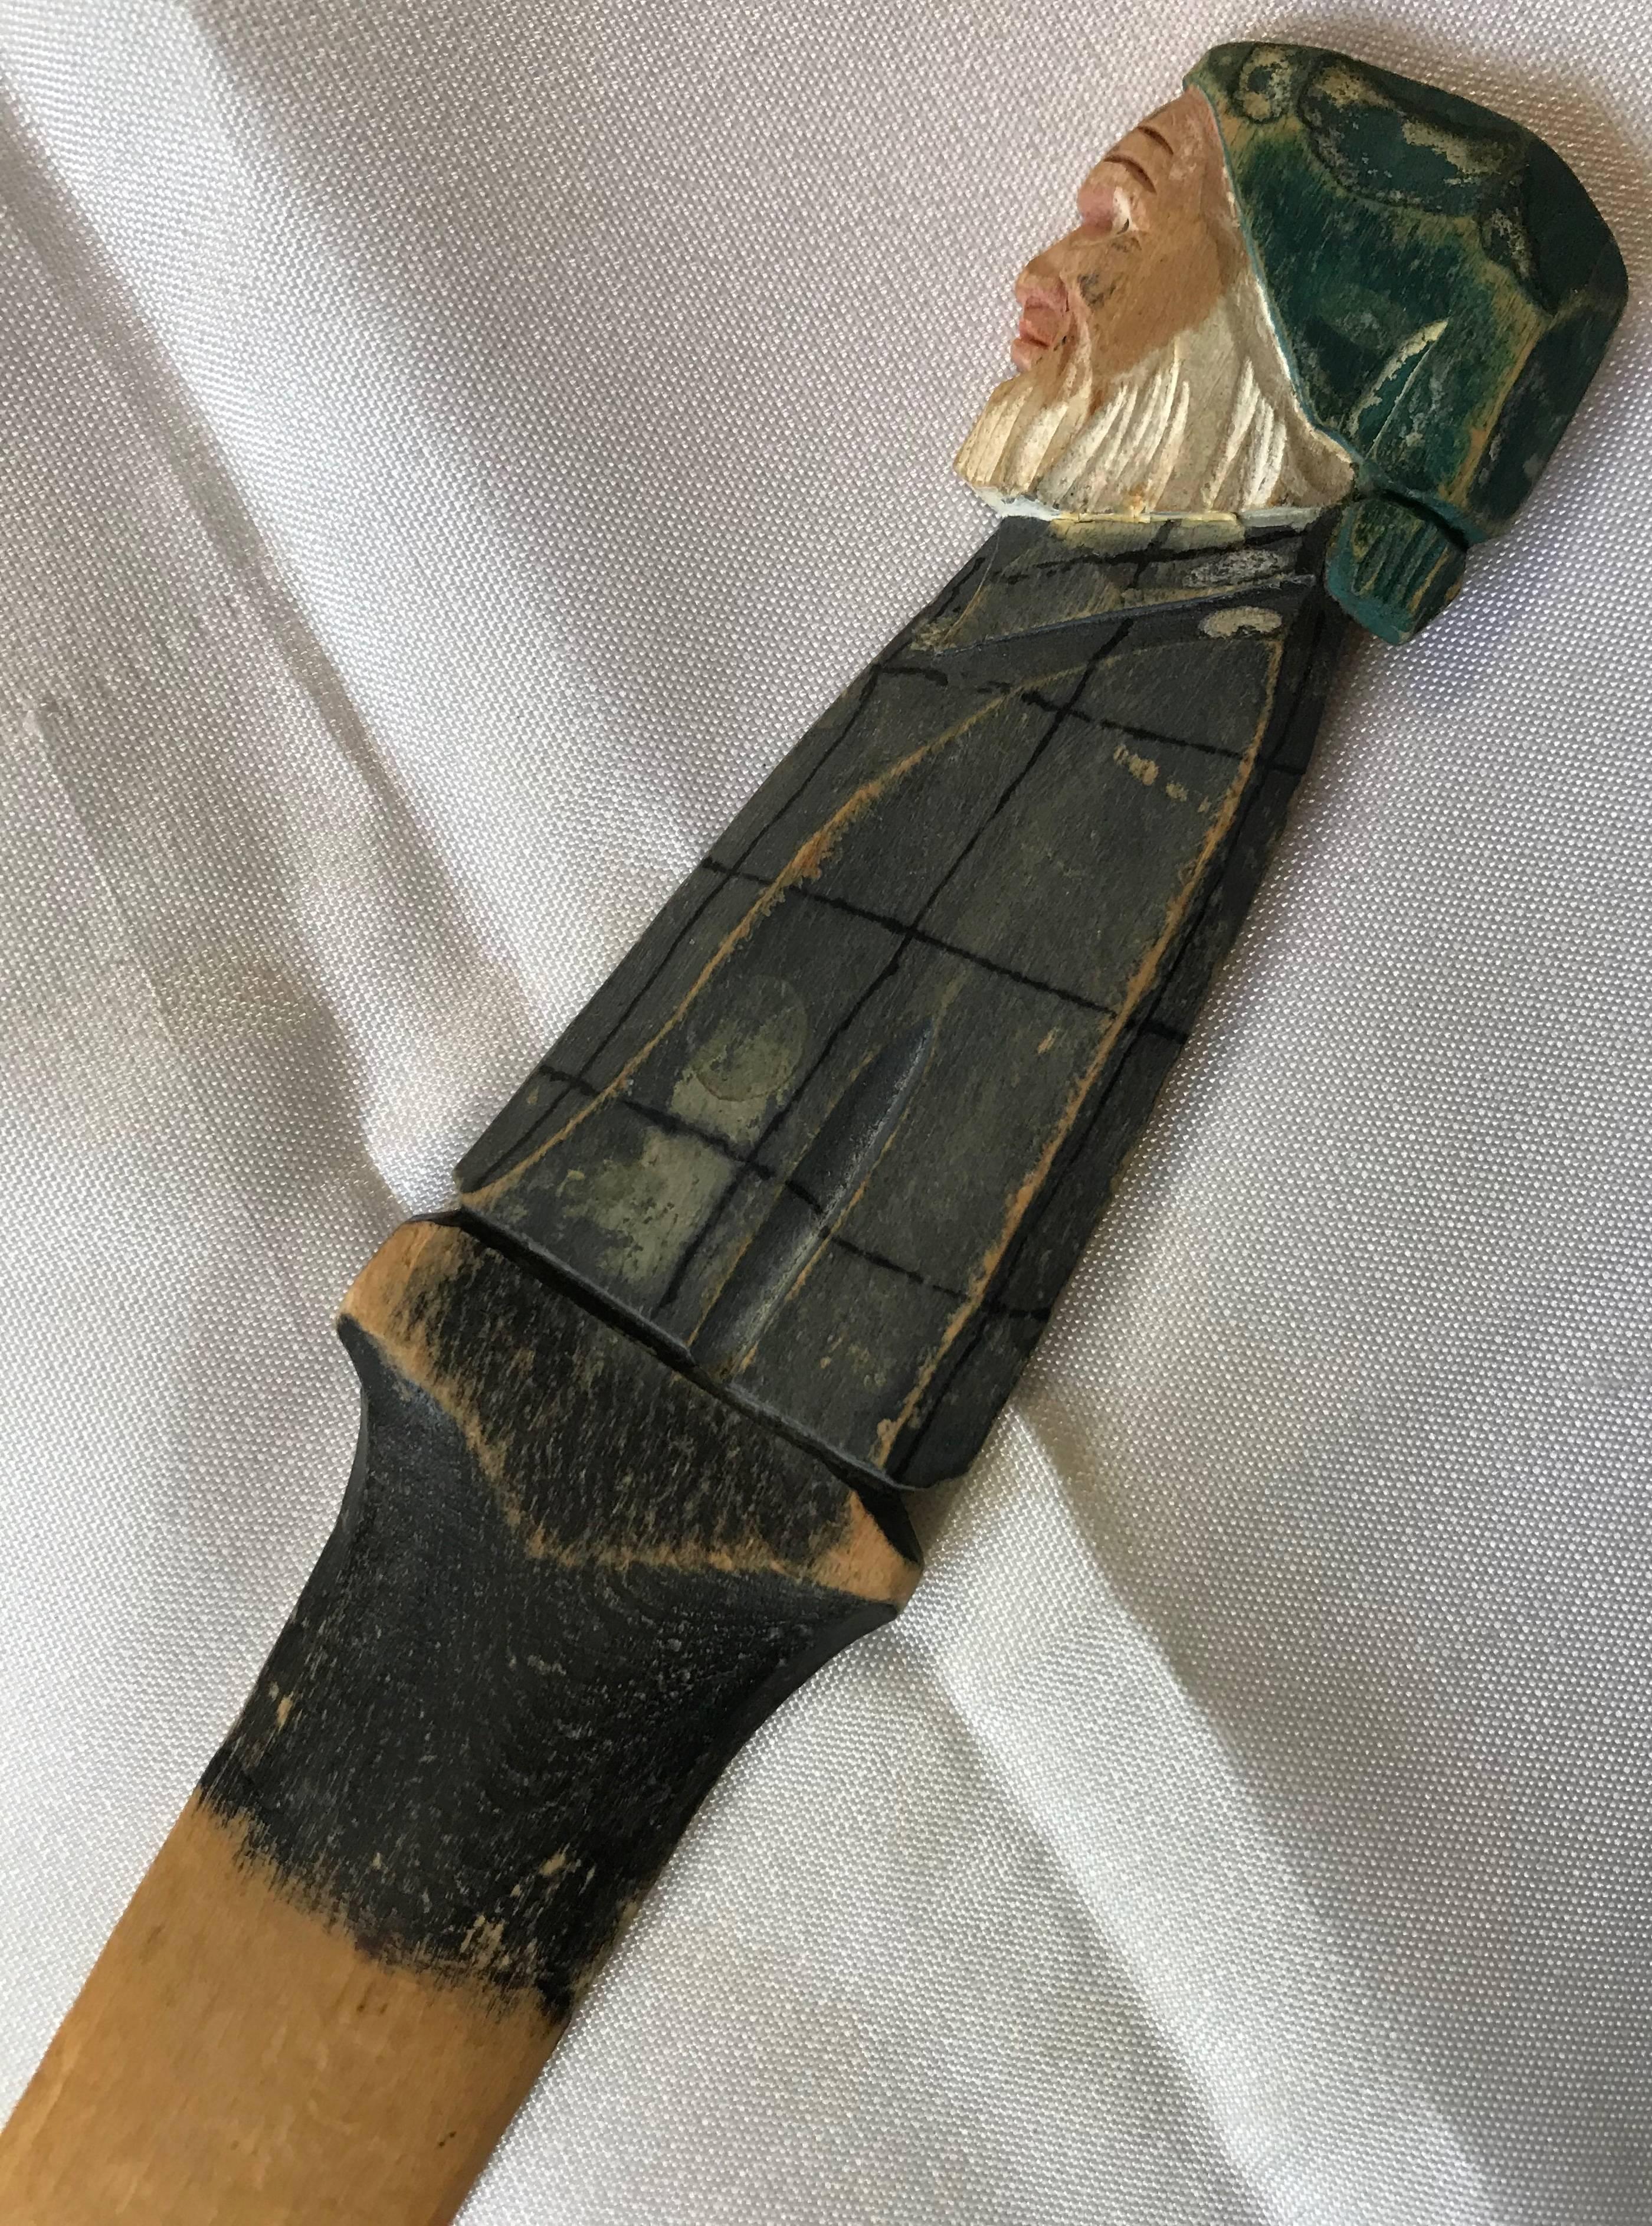 This vintage hand carved wooden letter opener boasts an older gentleman with a white beard dressed in his night clothes. His head is topped by a green night cap and he wears gray with black pajamas.